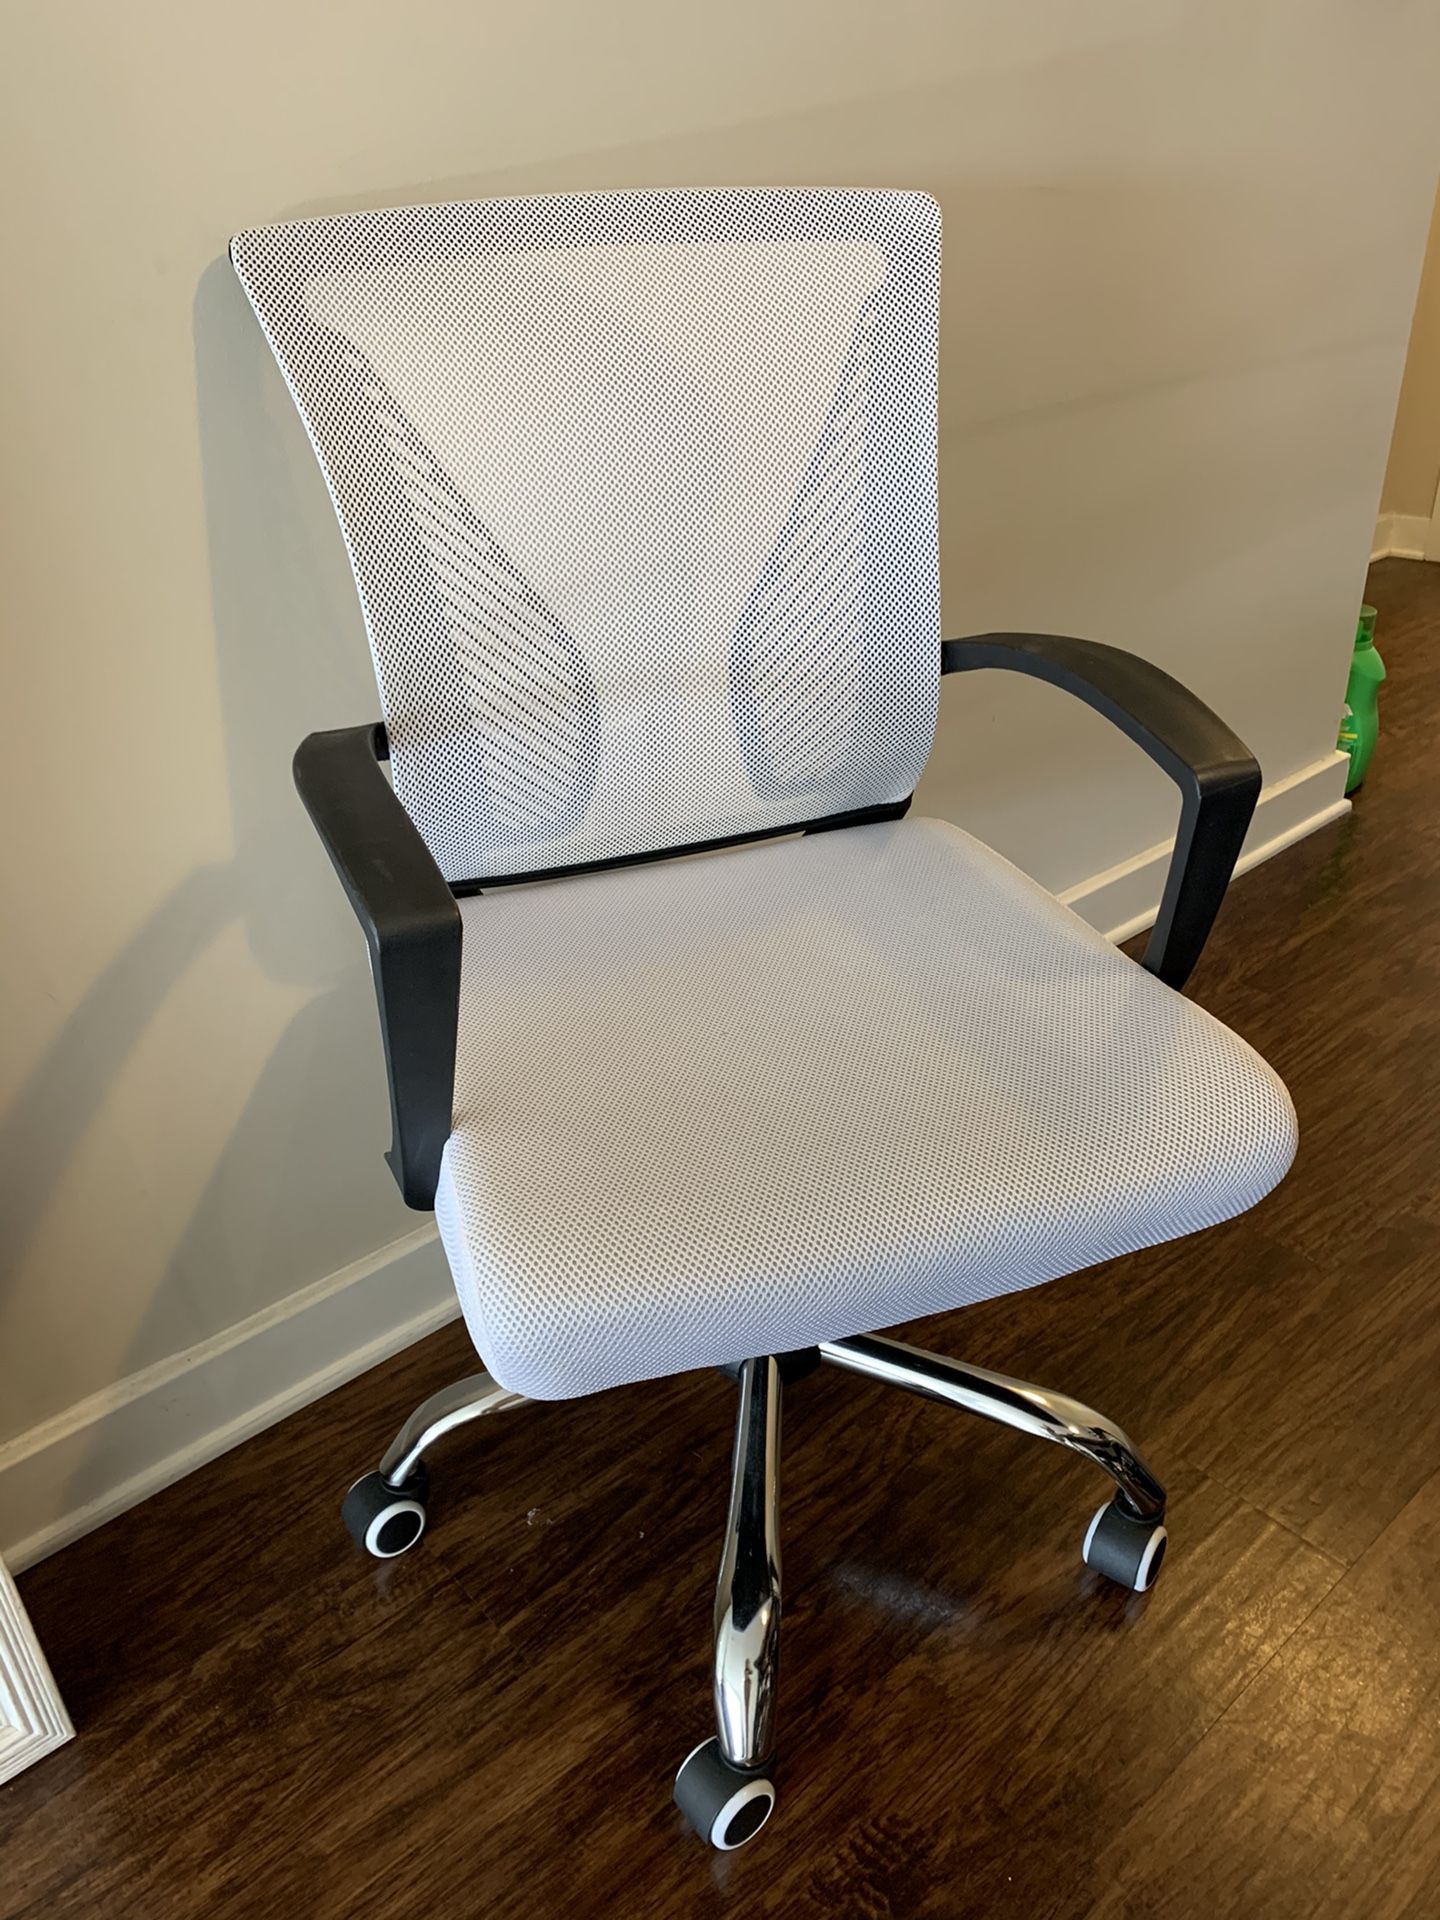 White and black desk chair